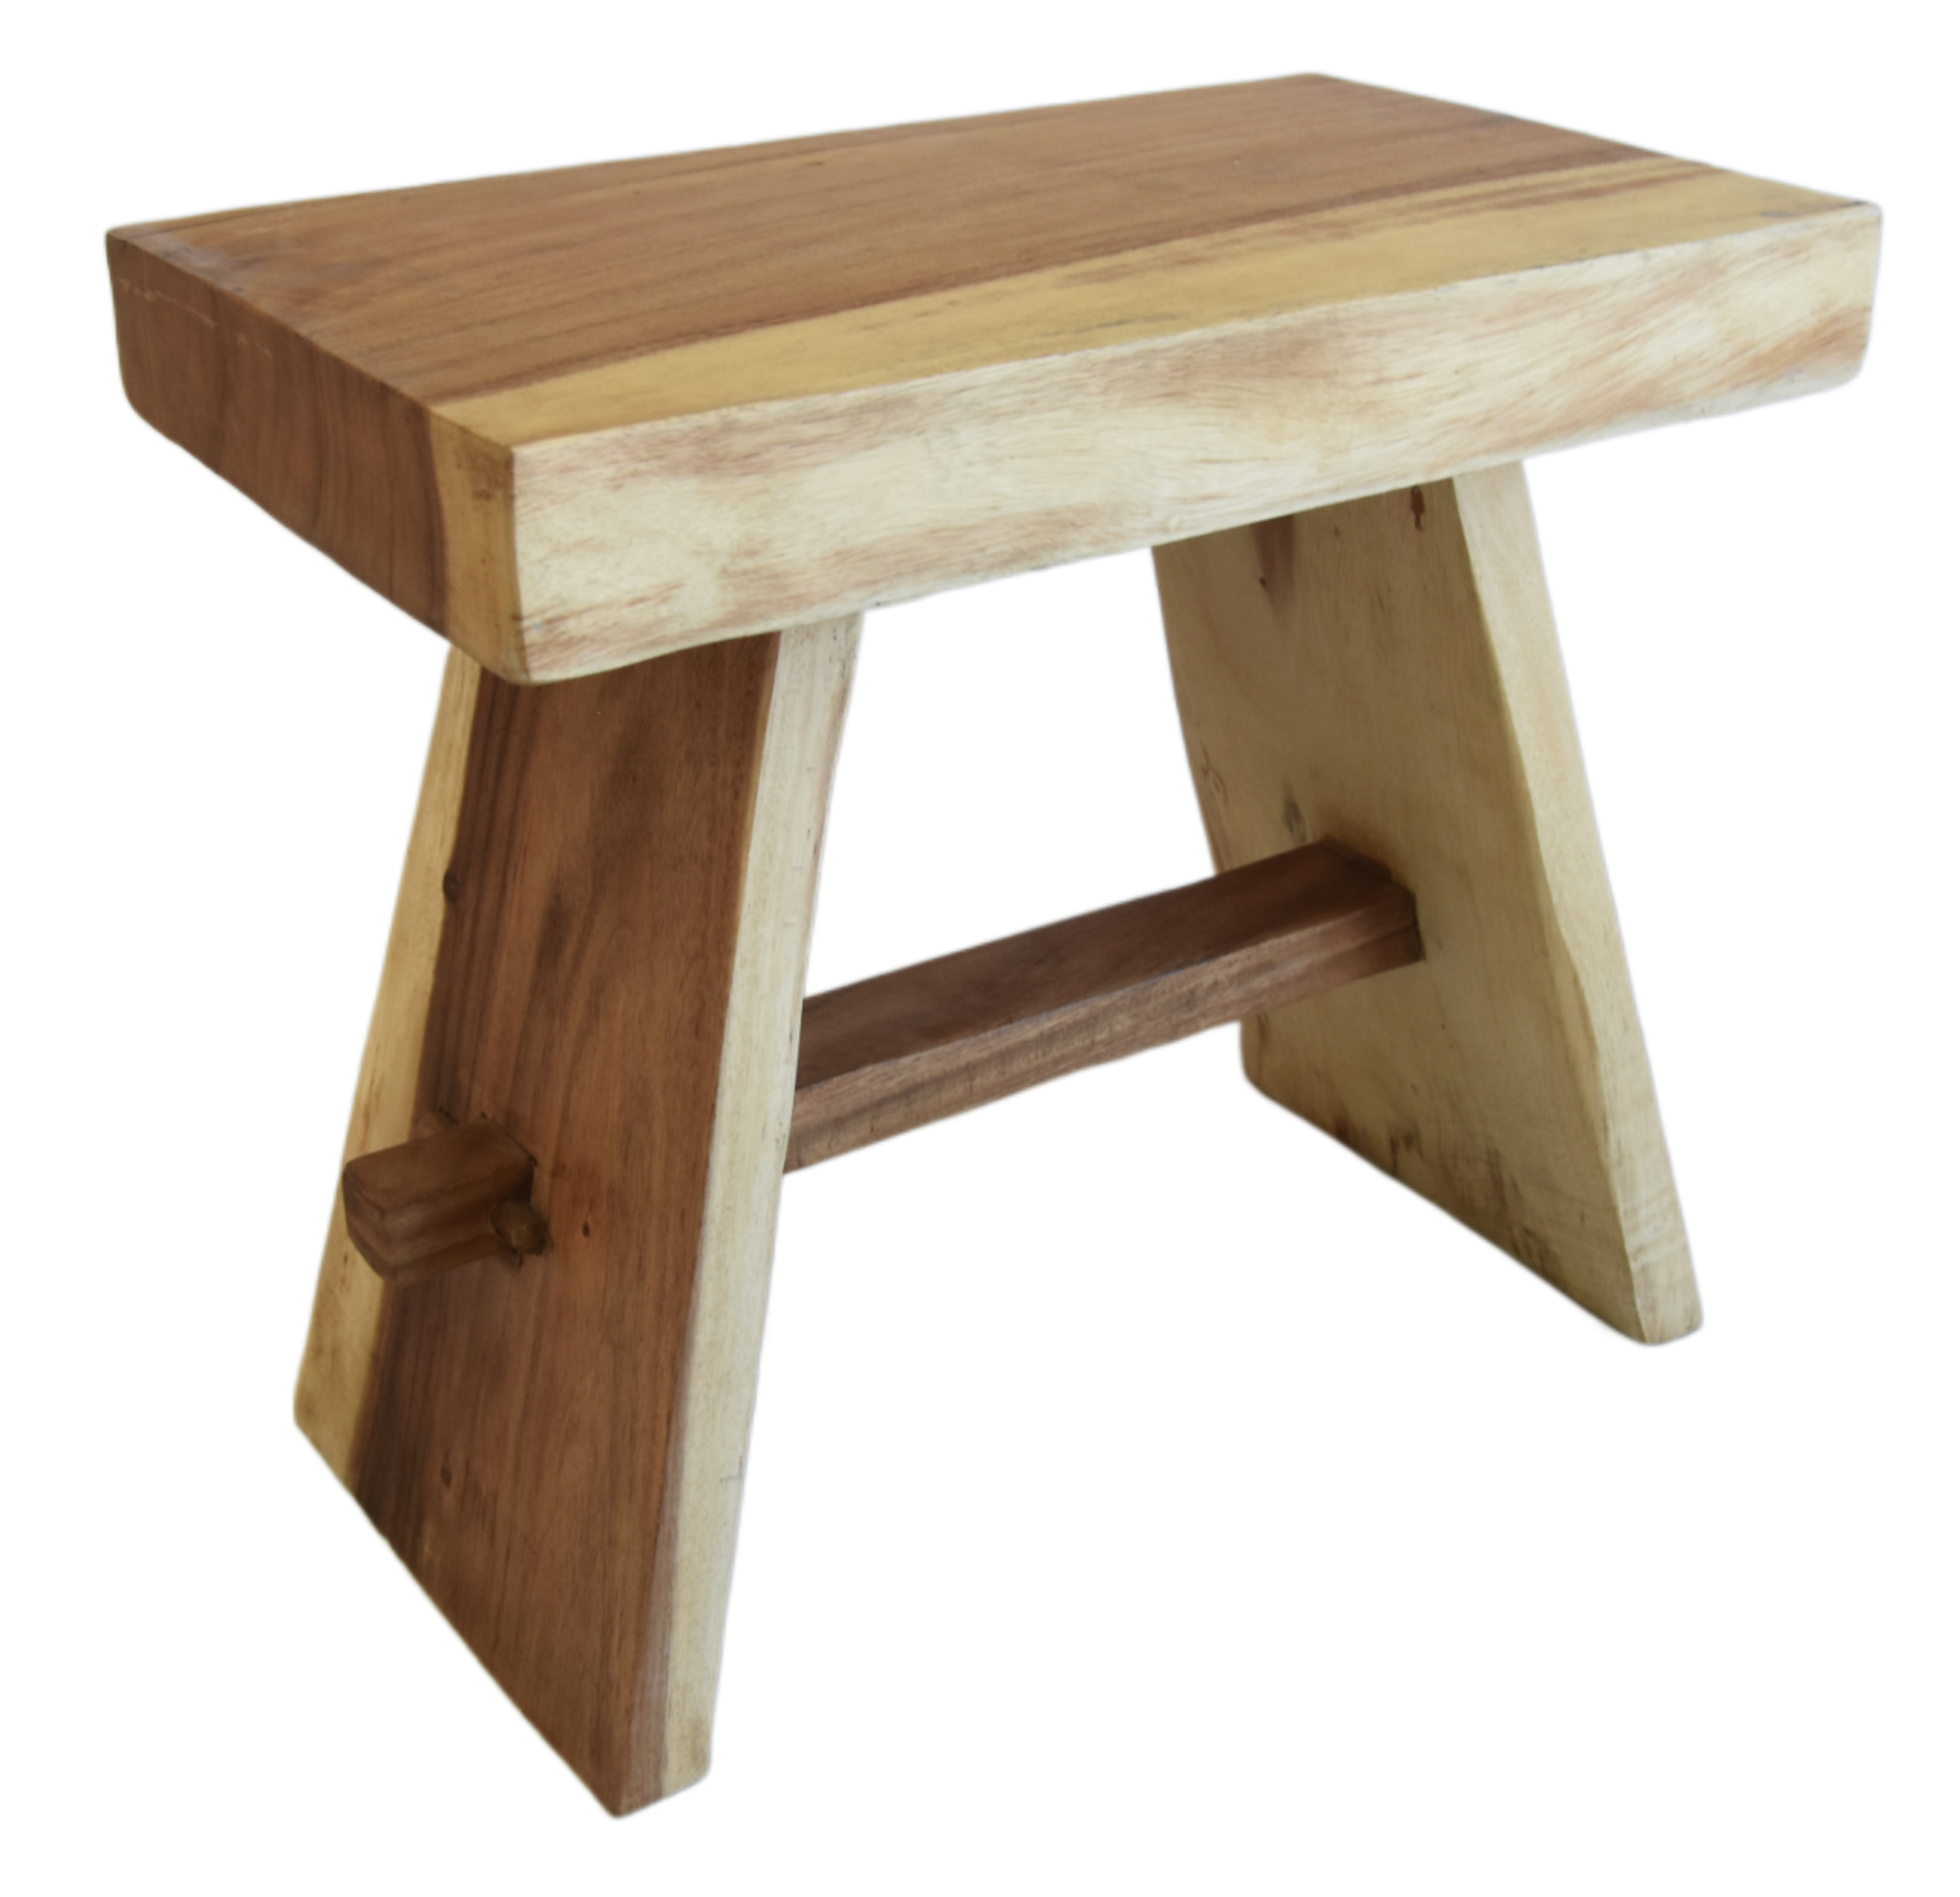 Munger Wood Side Table, Stool, or Bench~P77659819